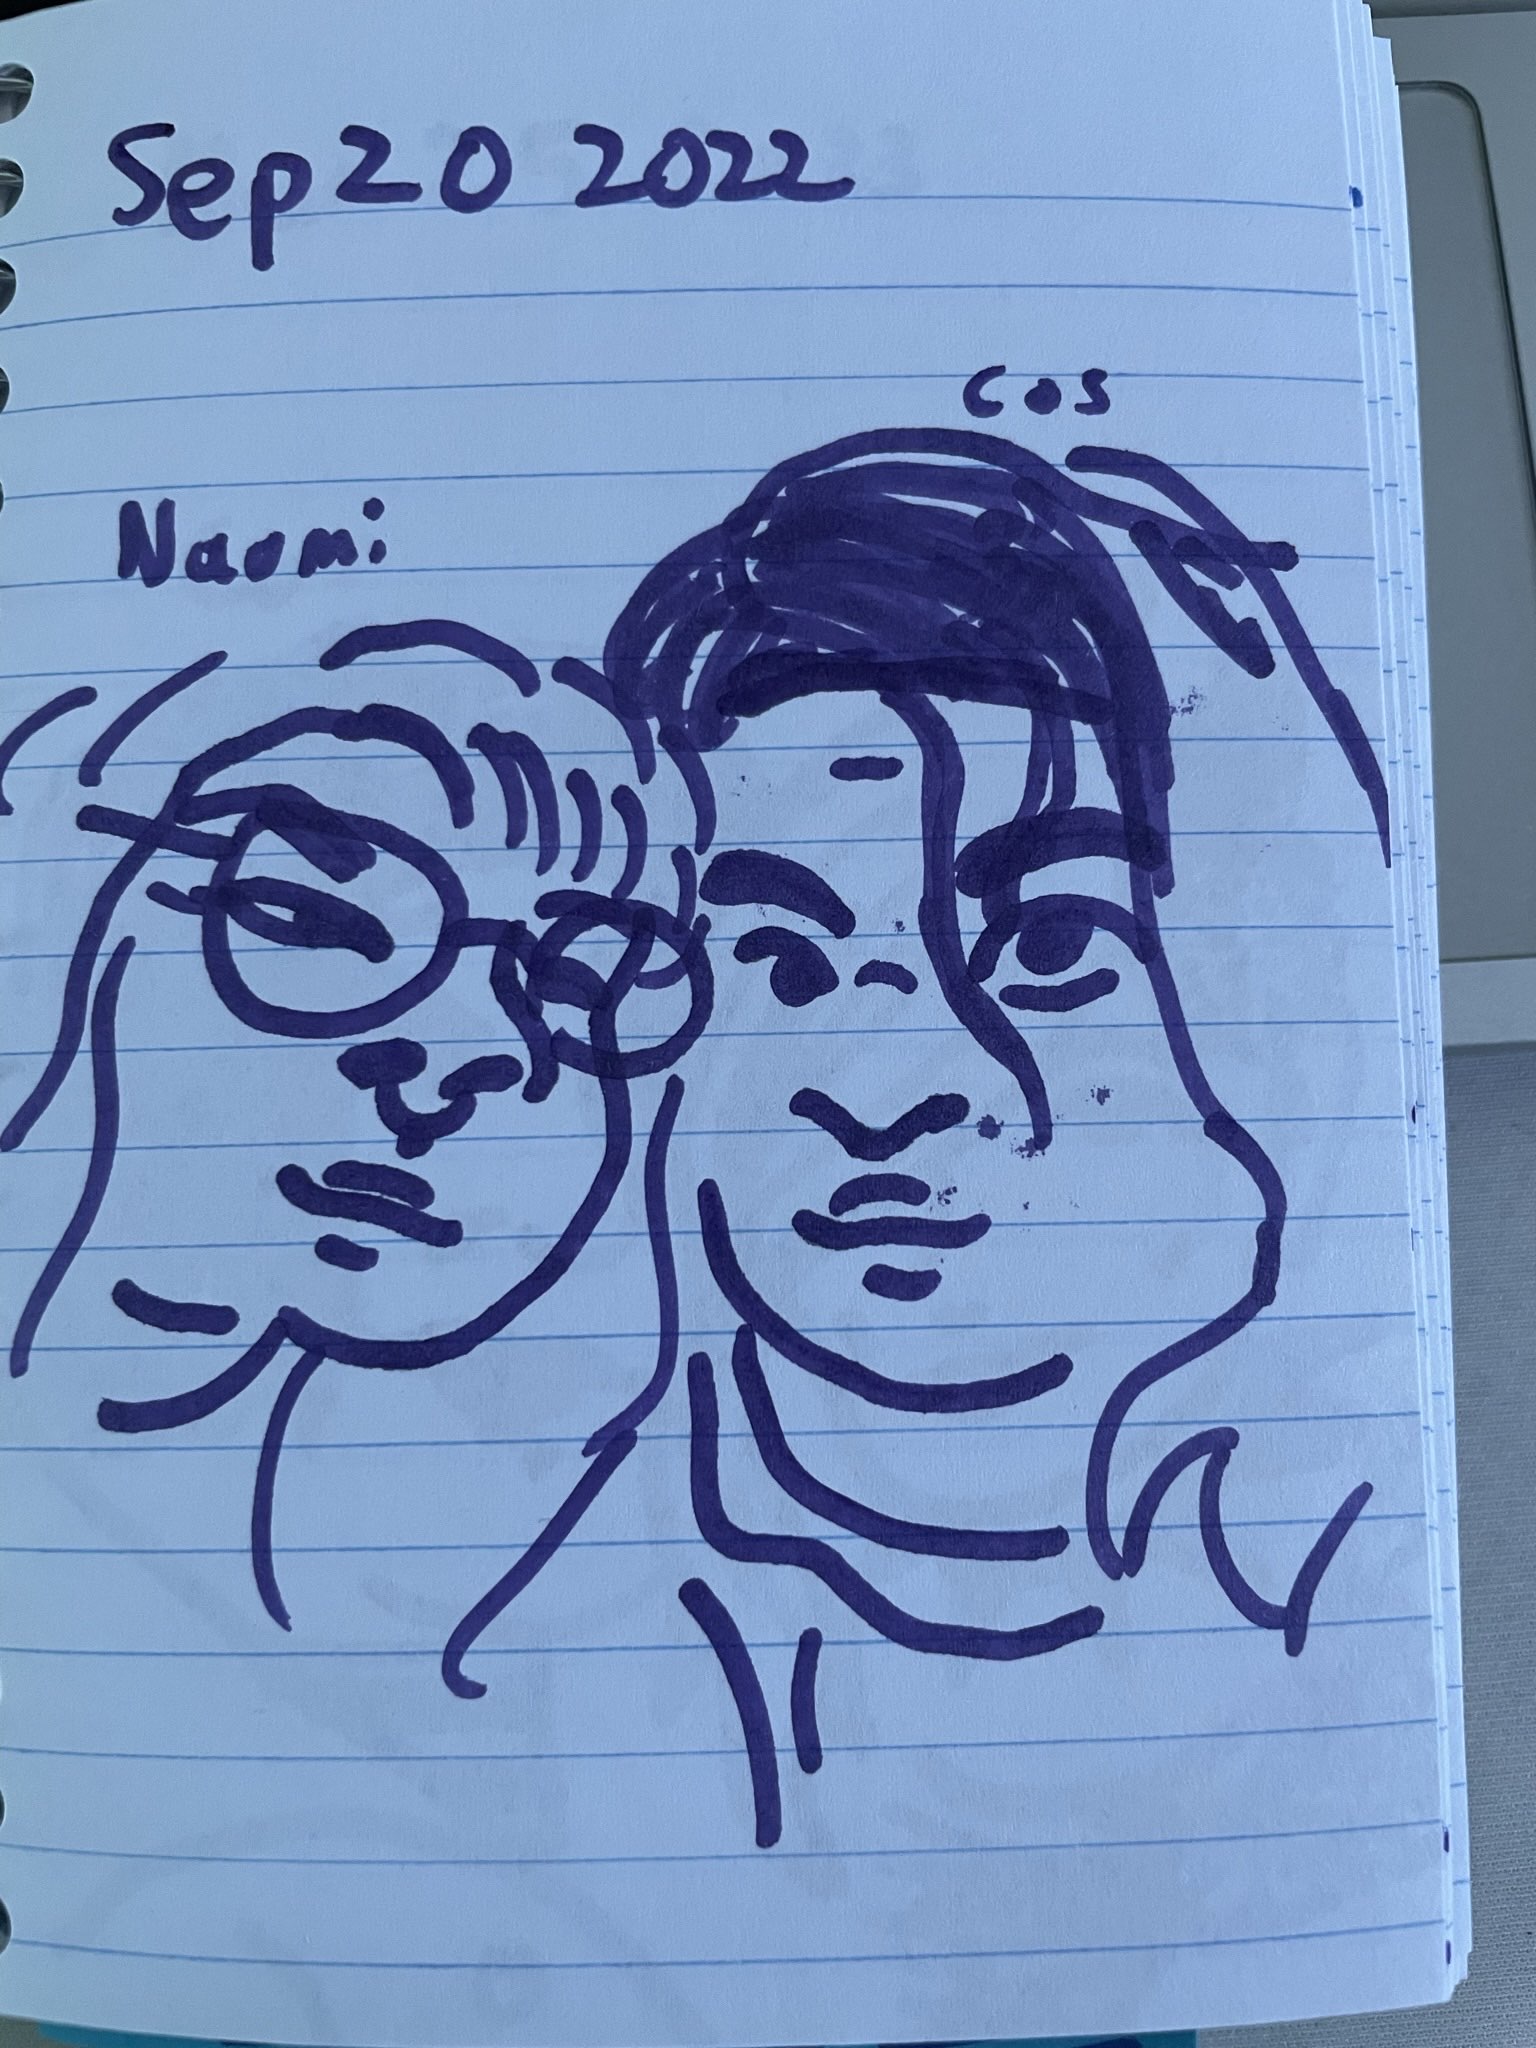  sep 20 2022 me and my ex girlfriend naomi. she is wearing round glasses and has a fluffy and long haircut. my hair is nearly as long as hers, going past my shoulders. 